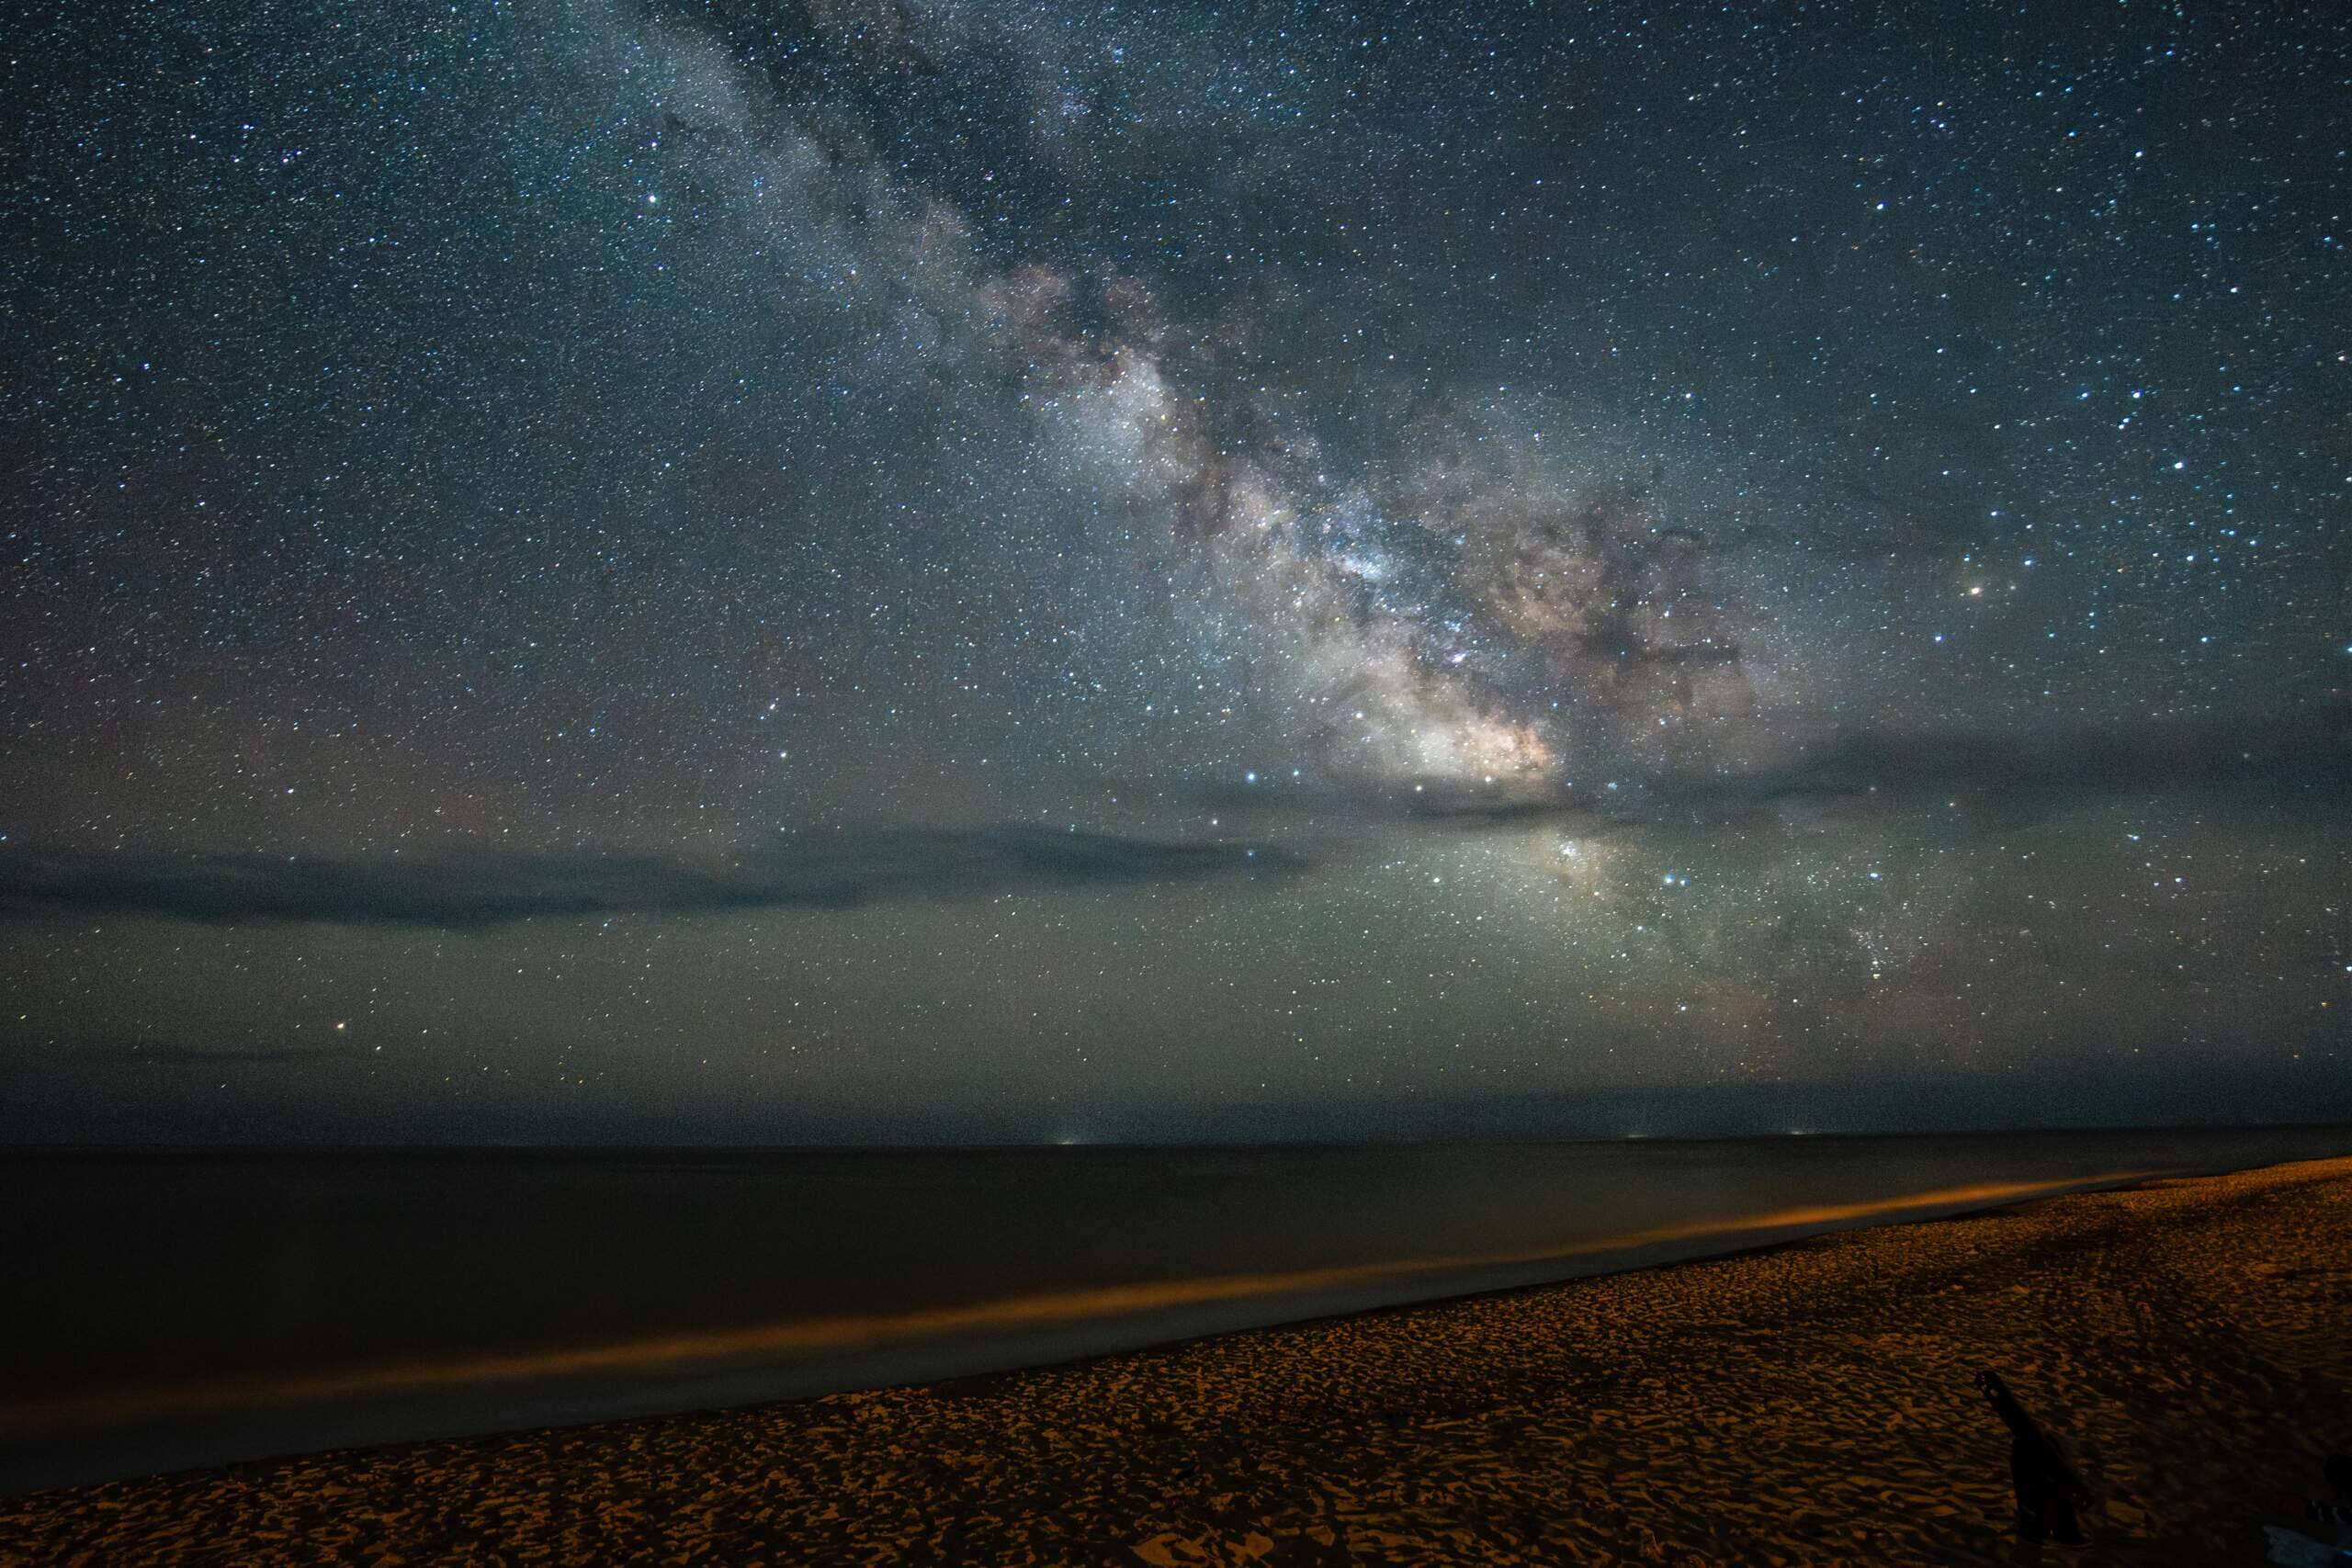 The Milky Way seen from Siasconset beach in Nantucket. (Photo Courtesy of Anavi Uppal)